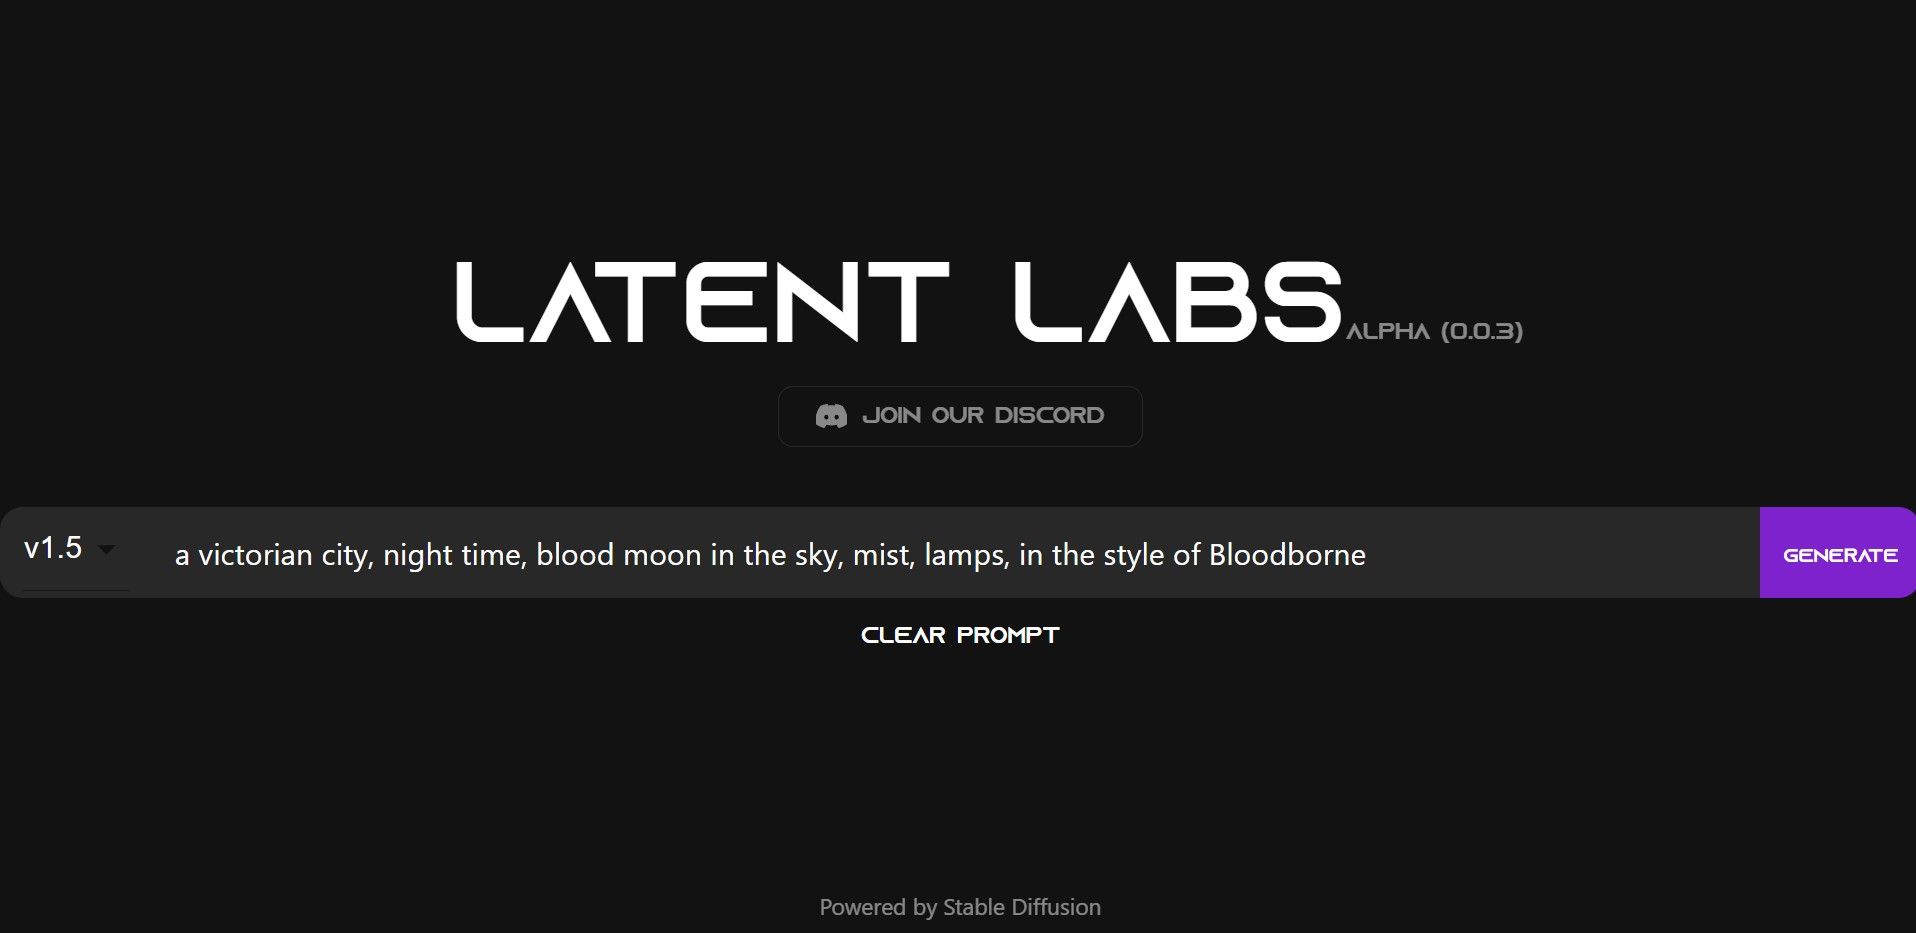 Latent Labs